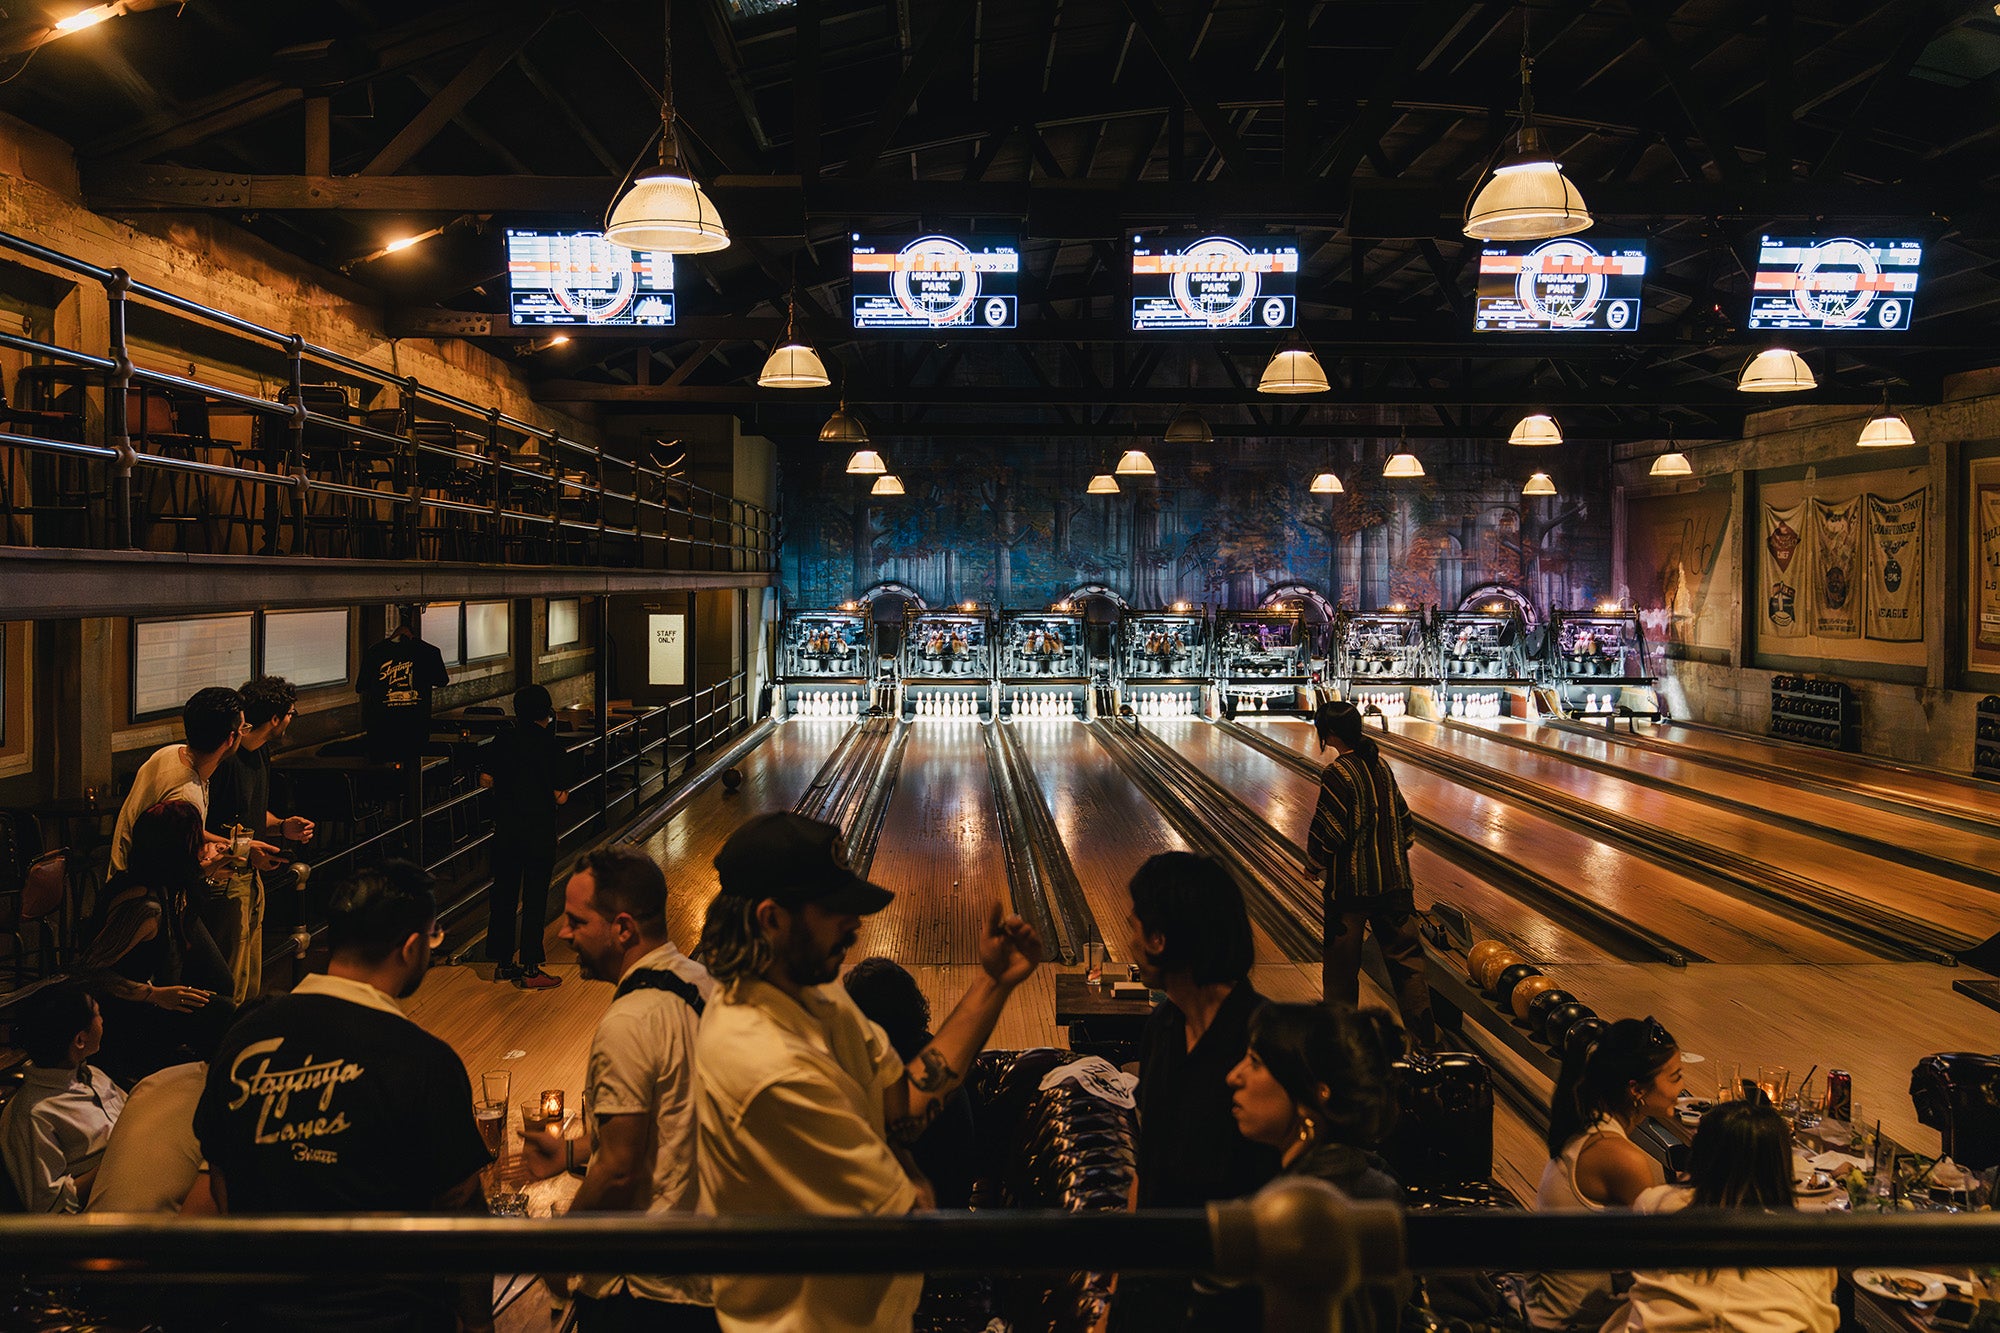 A wide view of a dark vintage bowling alley.